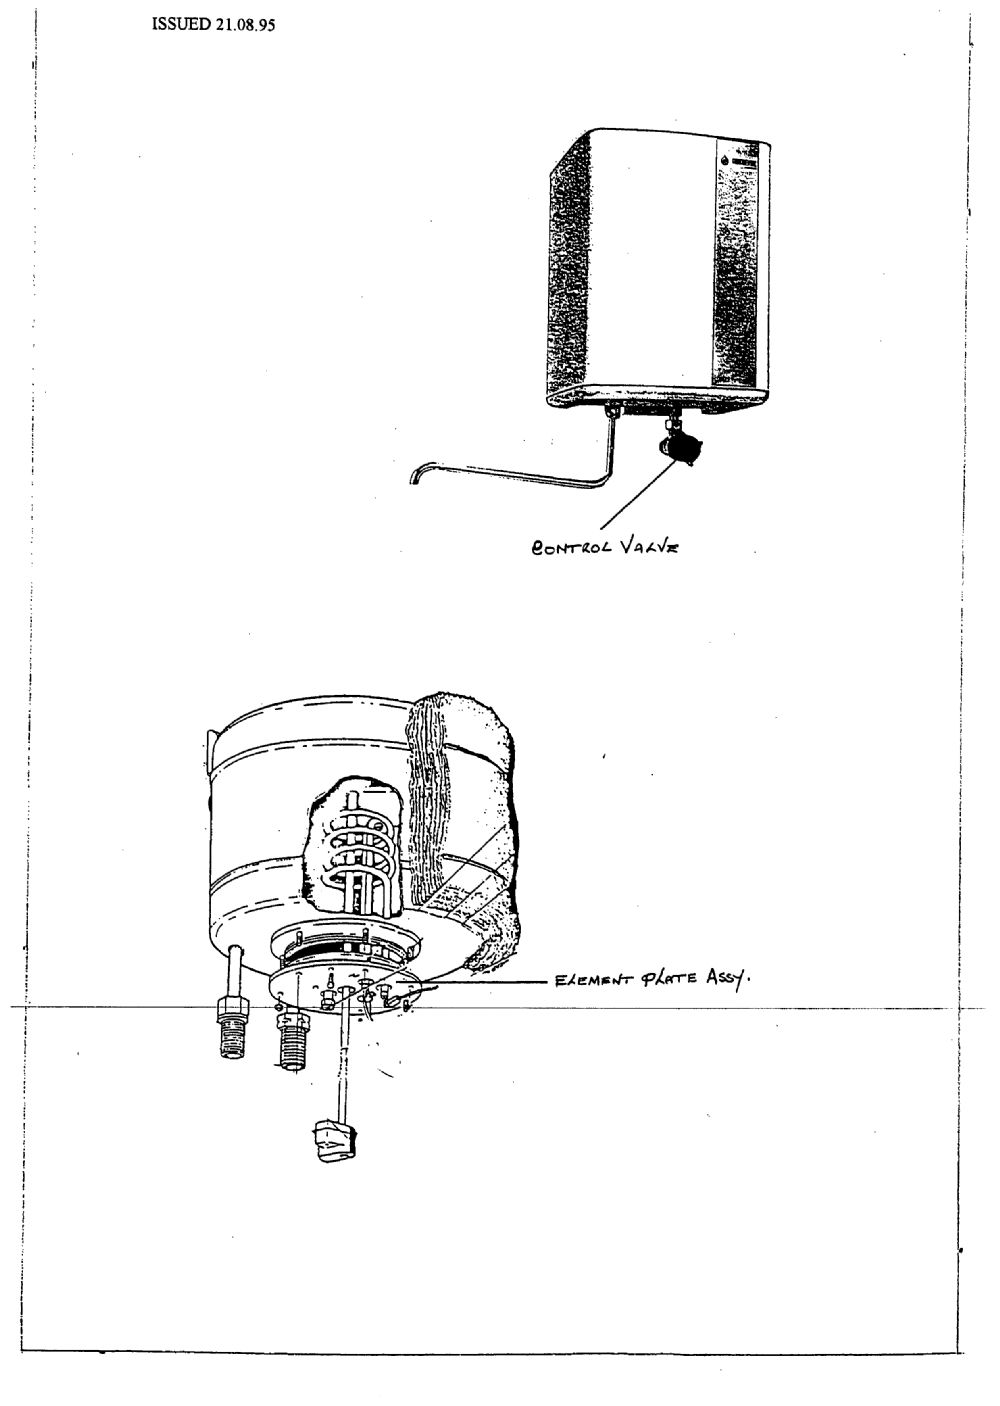 Continental Water Heater - appliance_5627